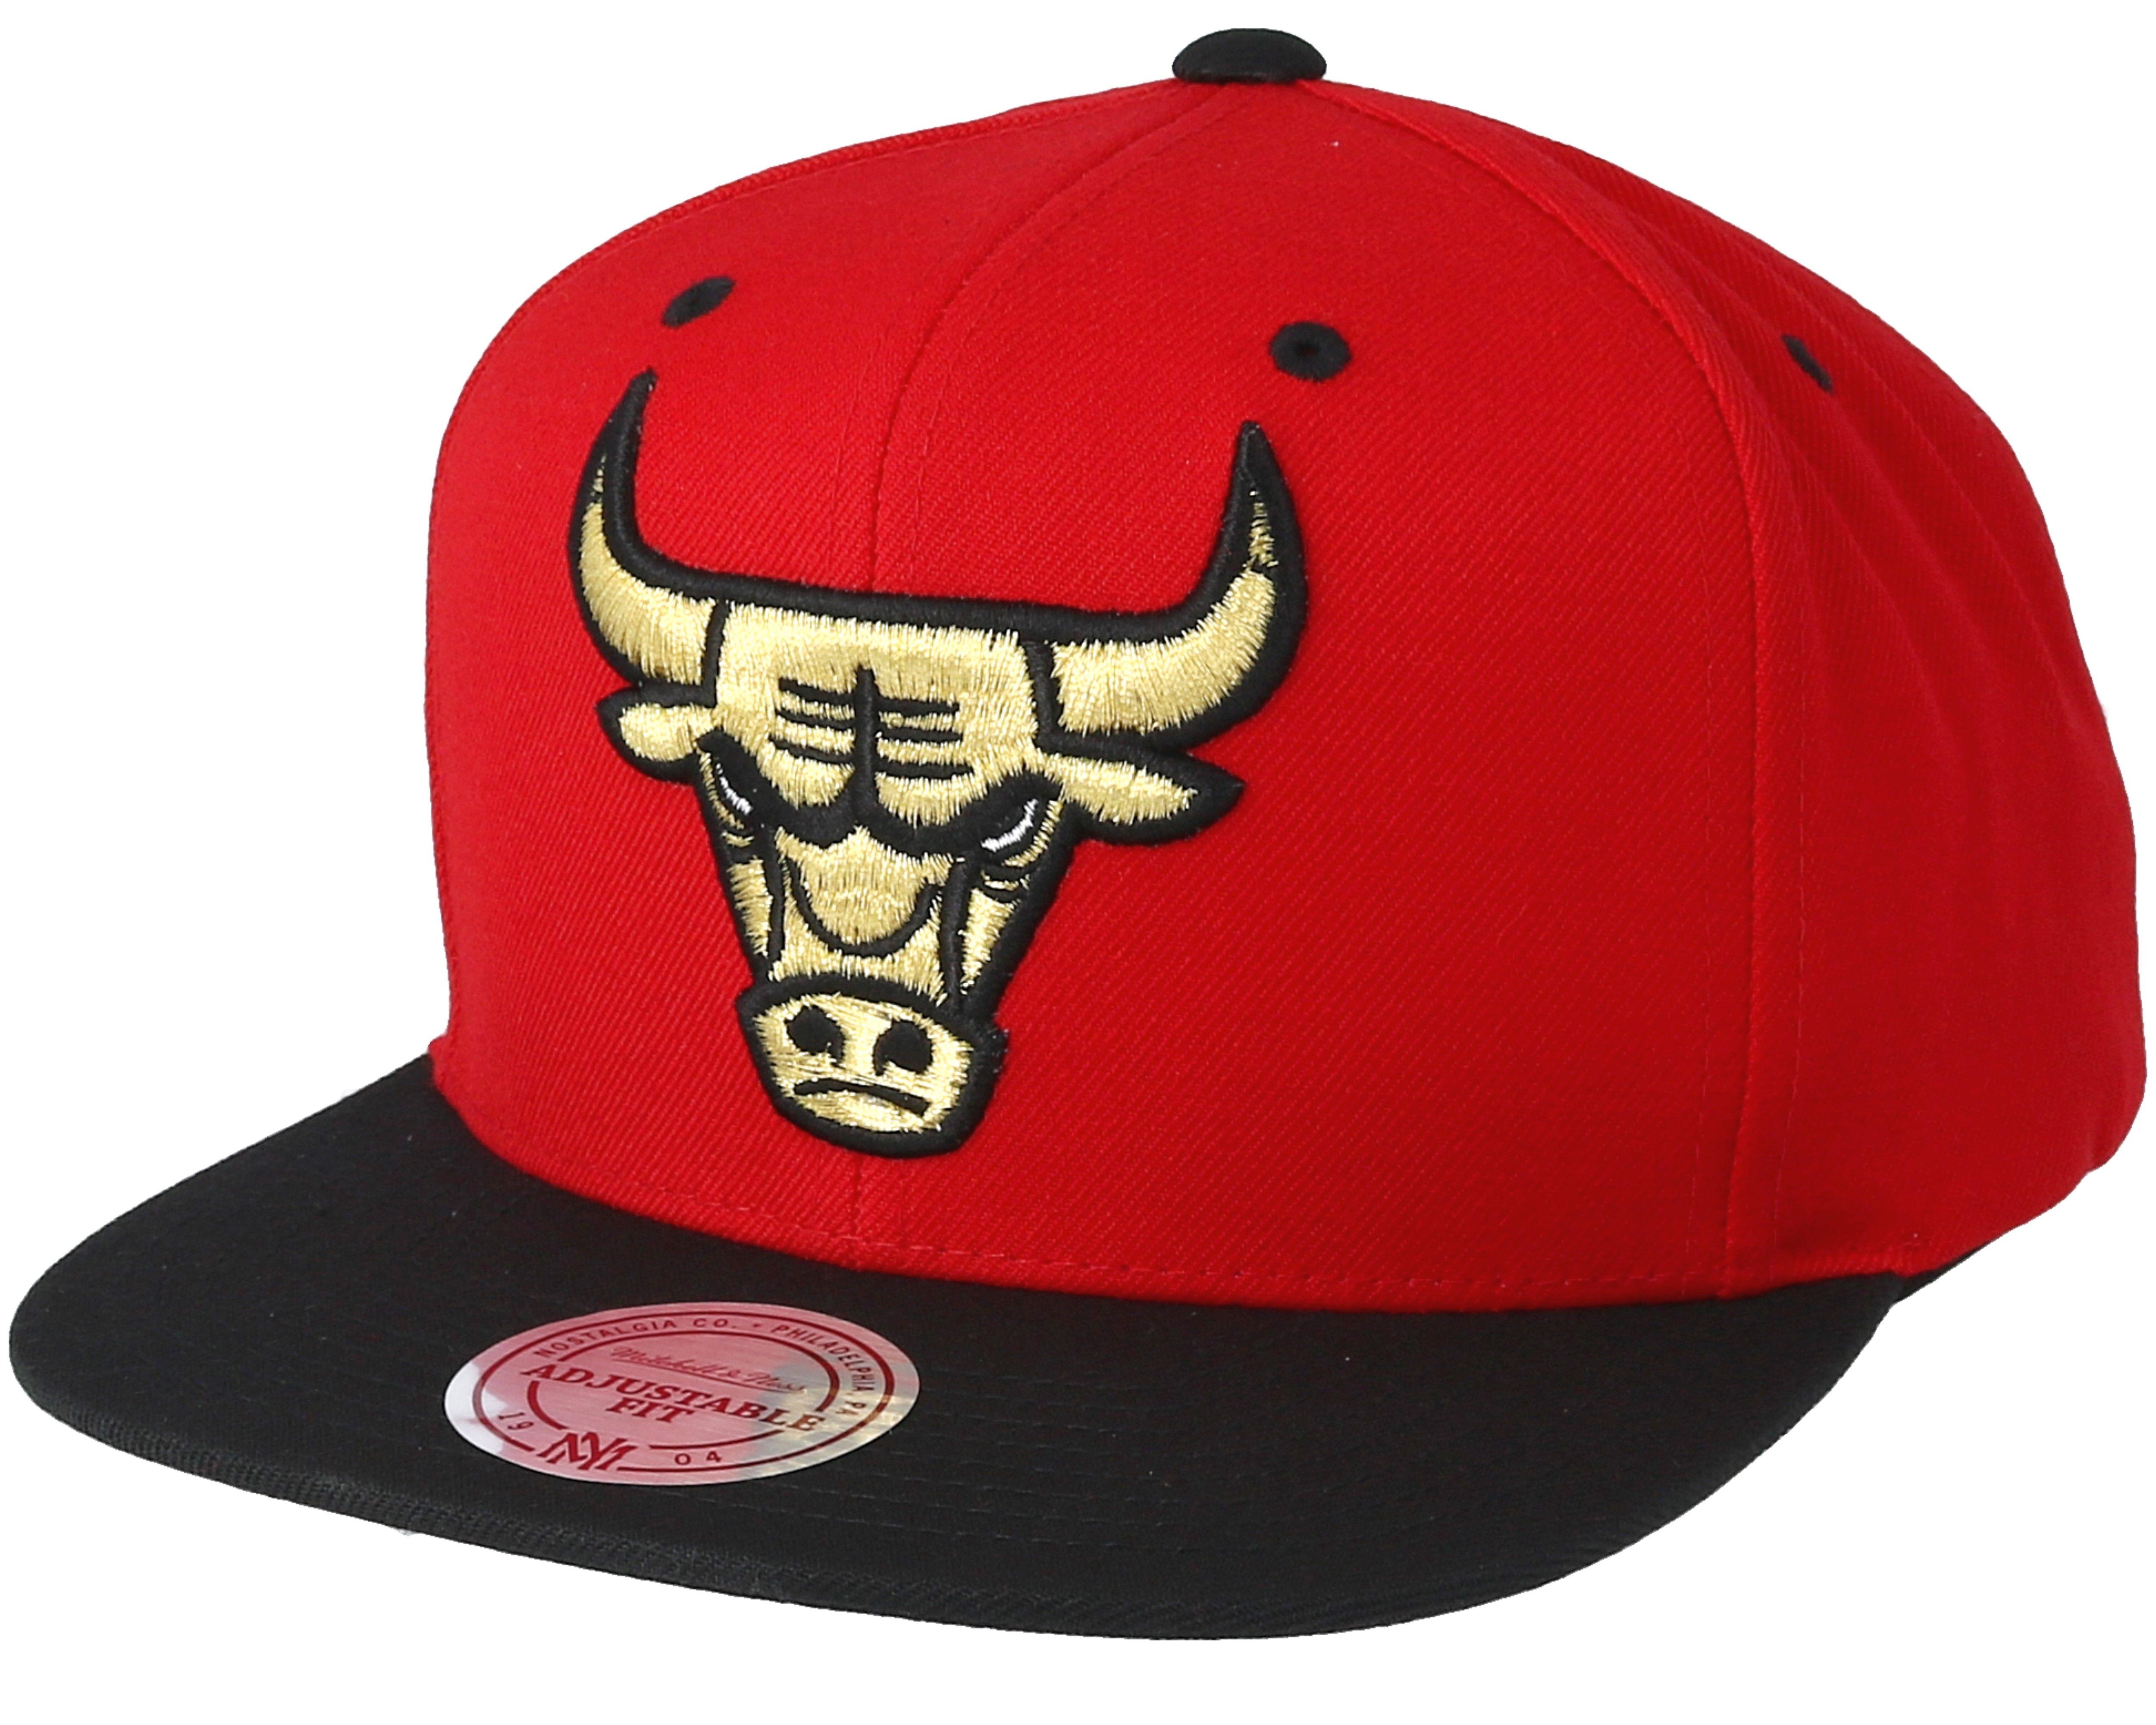 Red Black and Gold Logo - Chicago Bulls Black & Gold Metallic Red Snapback & Ness